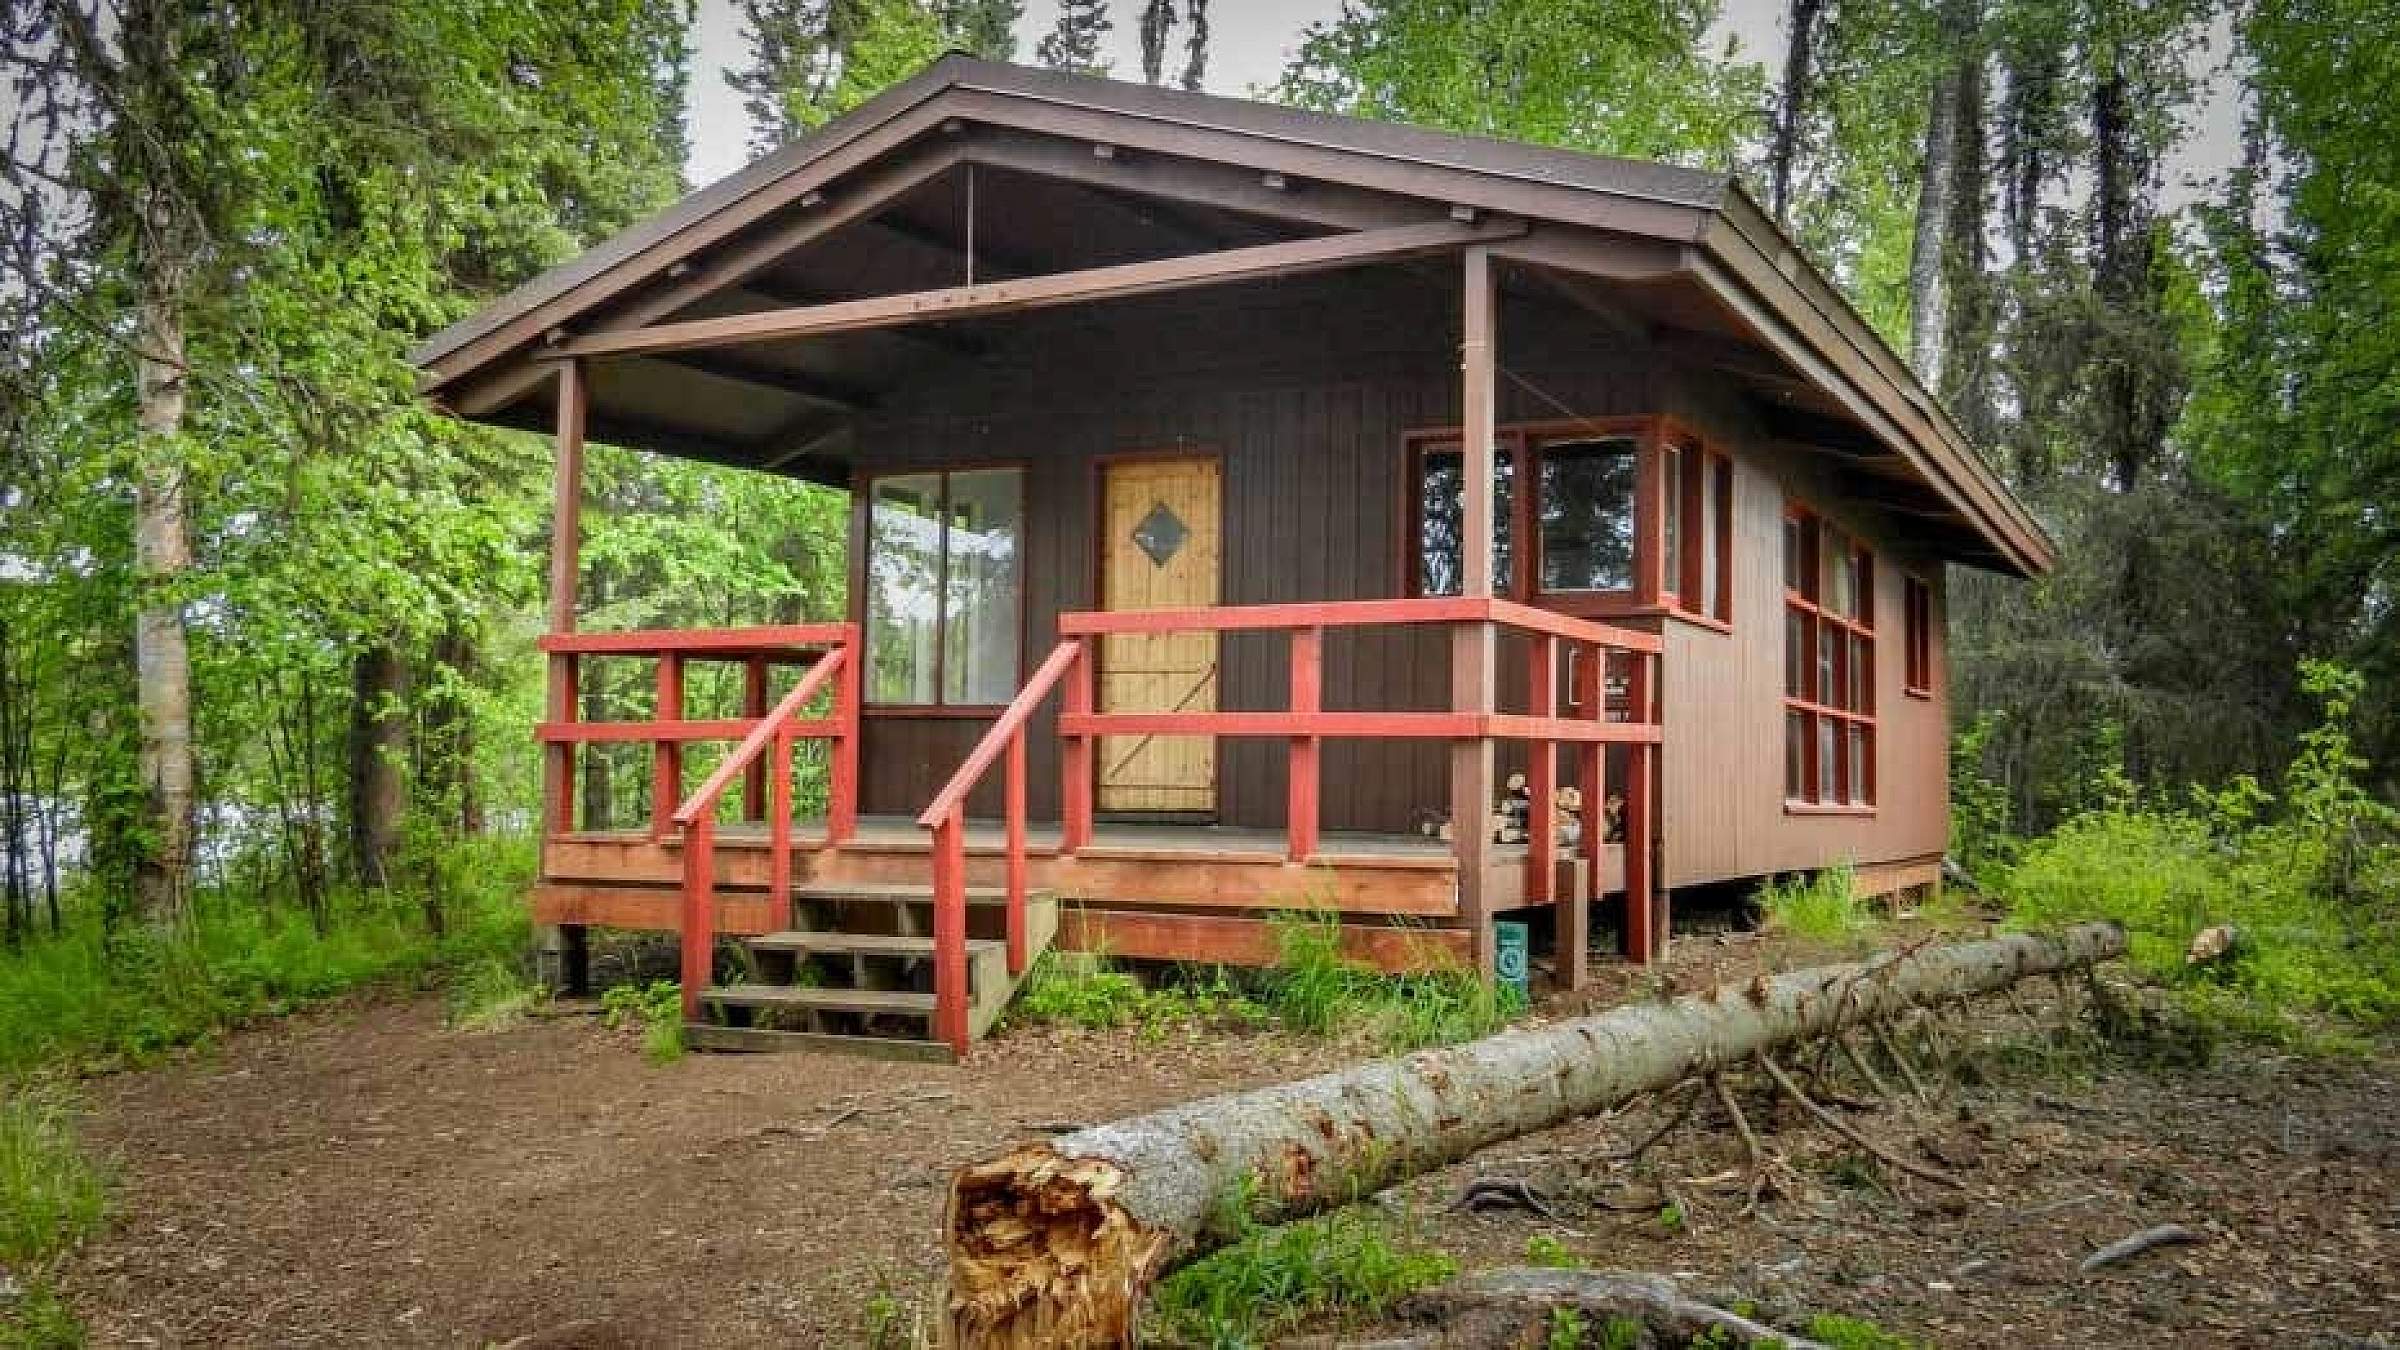 Red Shirt Lake Cabin is a 20-by-24 well-maintained cabin with sleeping space for up to 7